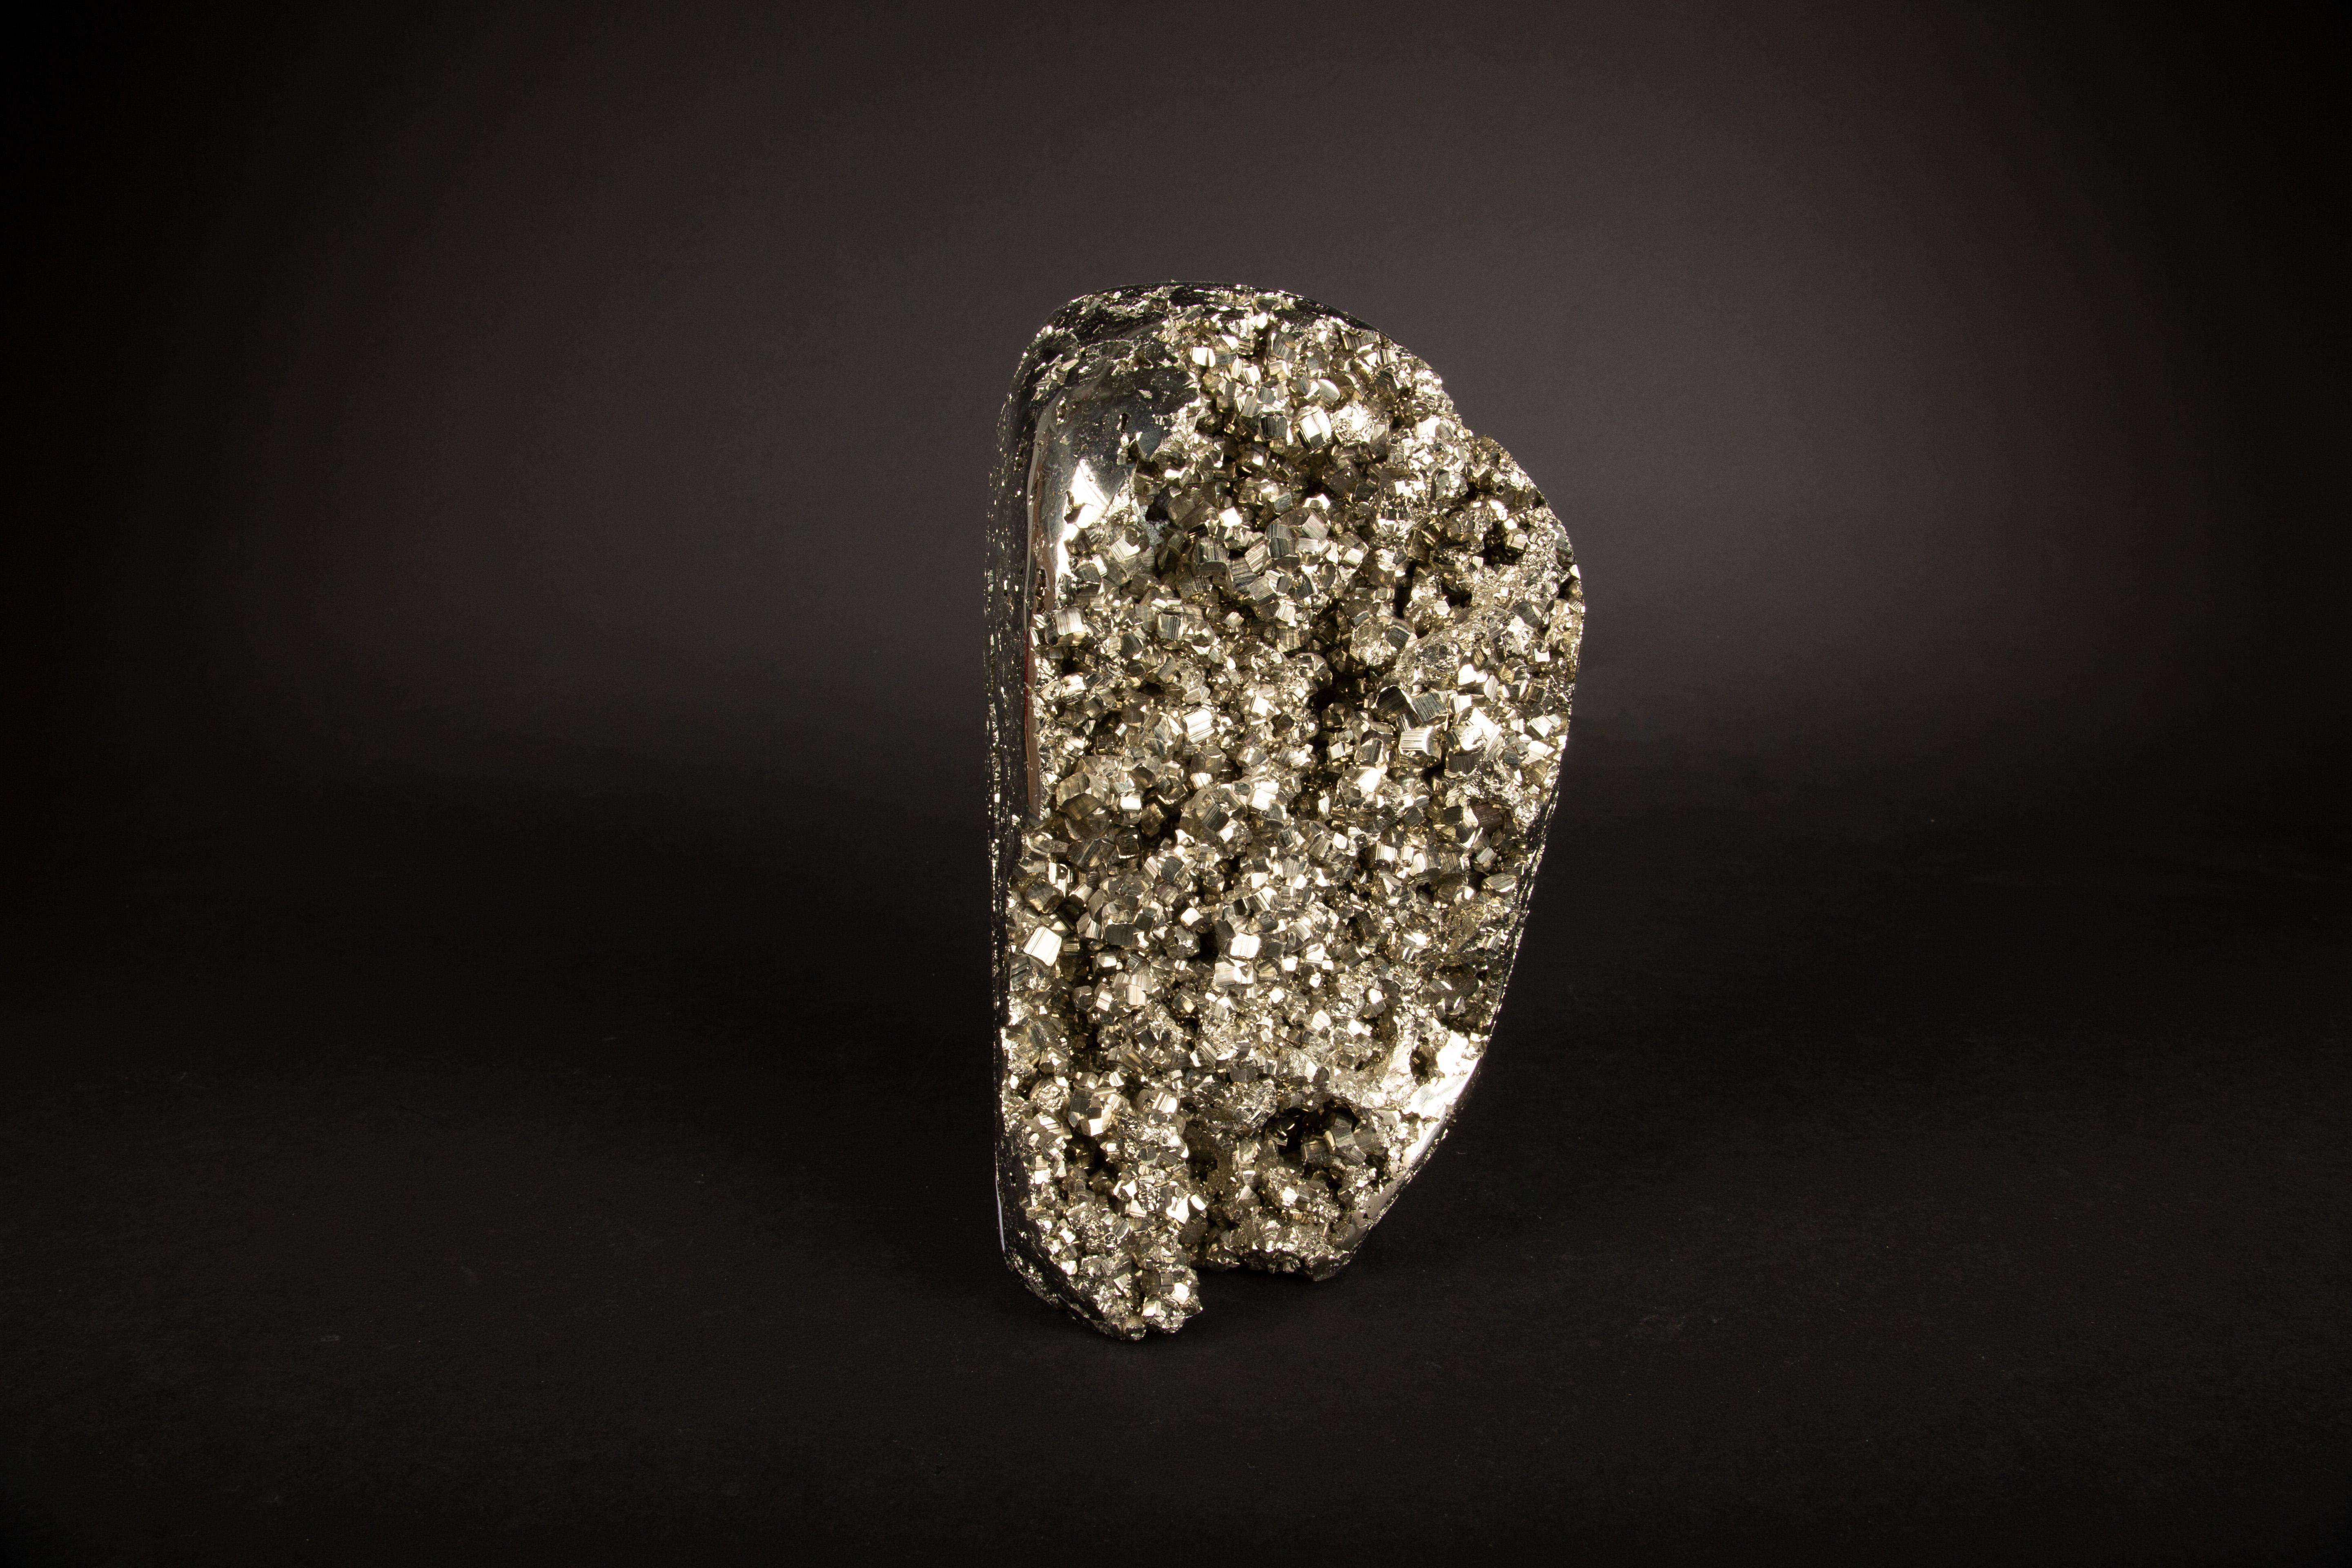 This large Pyrite Specimen stands at an impressive 9.25 inches in height, presenting a magnificent display of nature's artistry. Renowned for its metallic luster and golden hue, pyrite—often called 